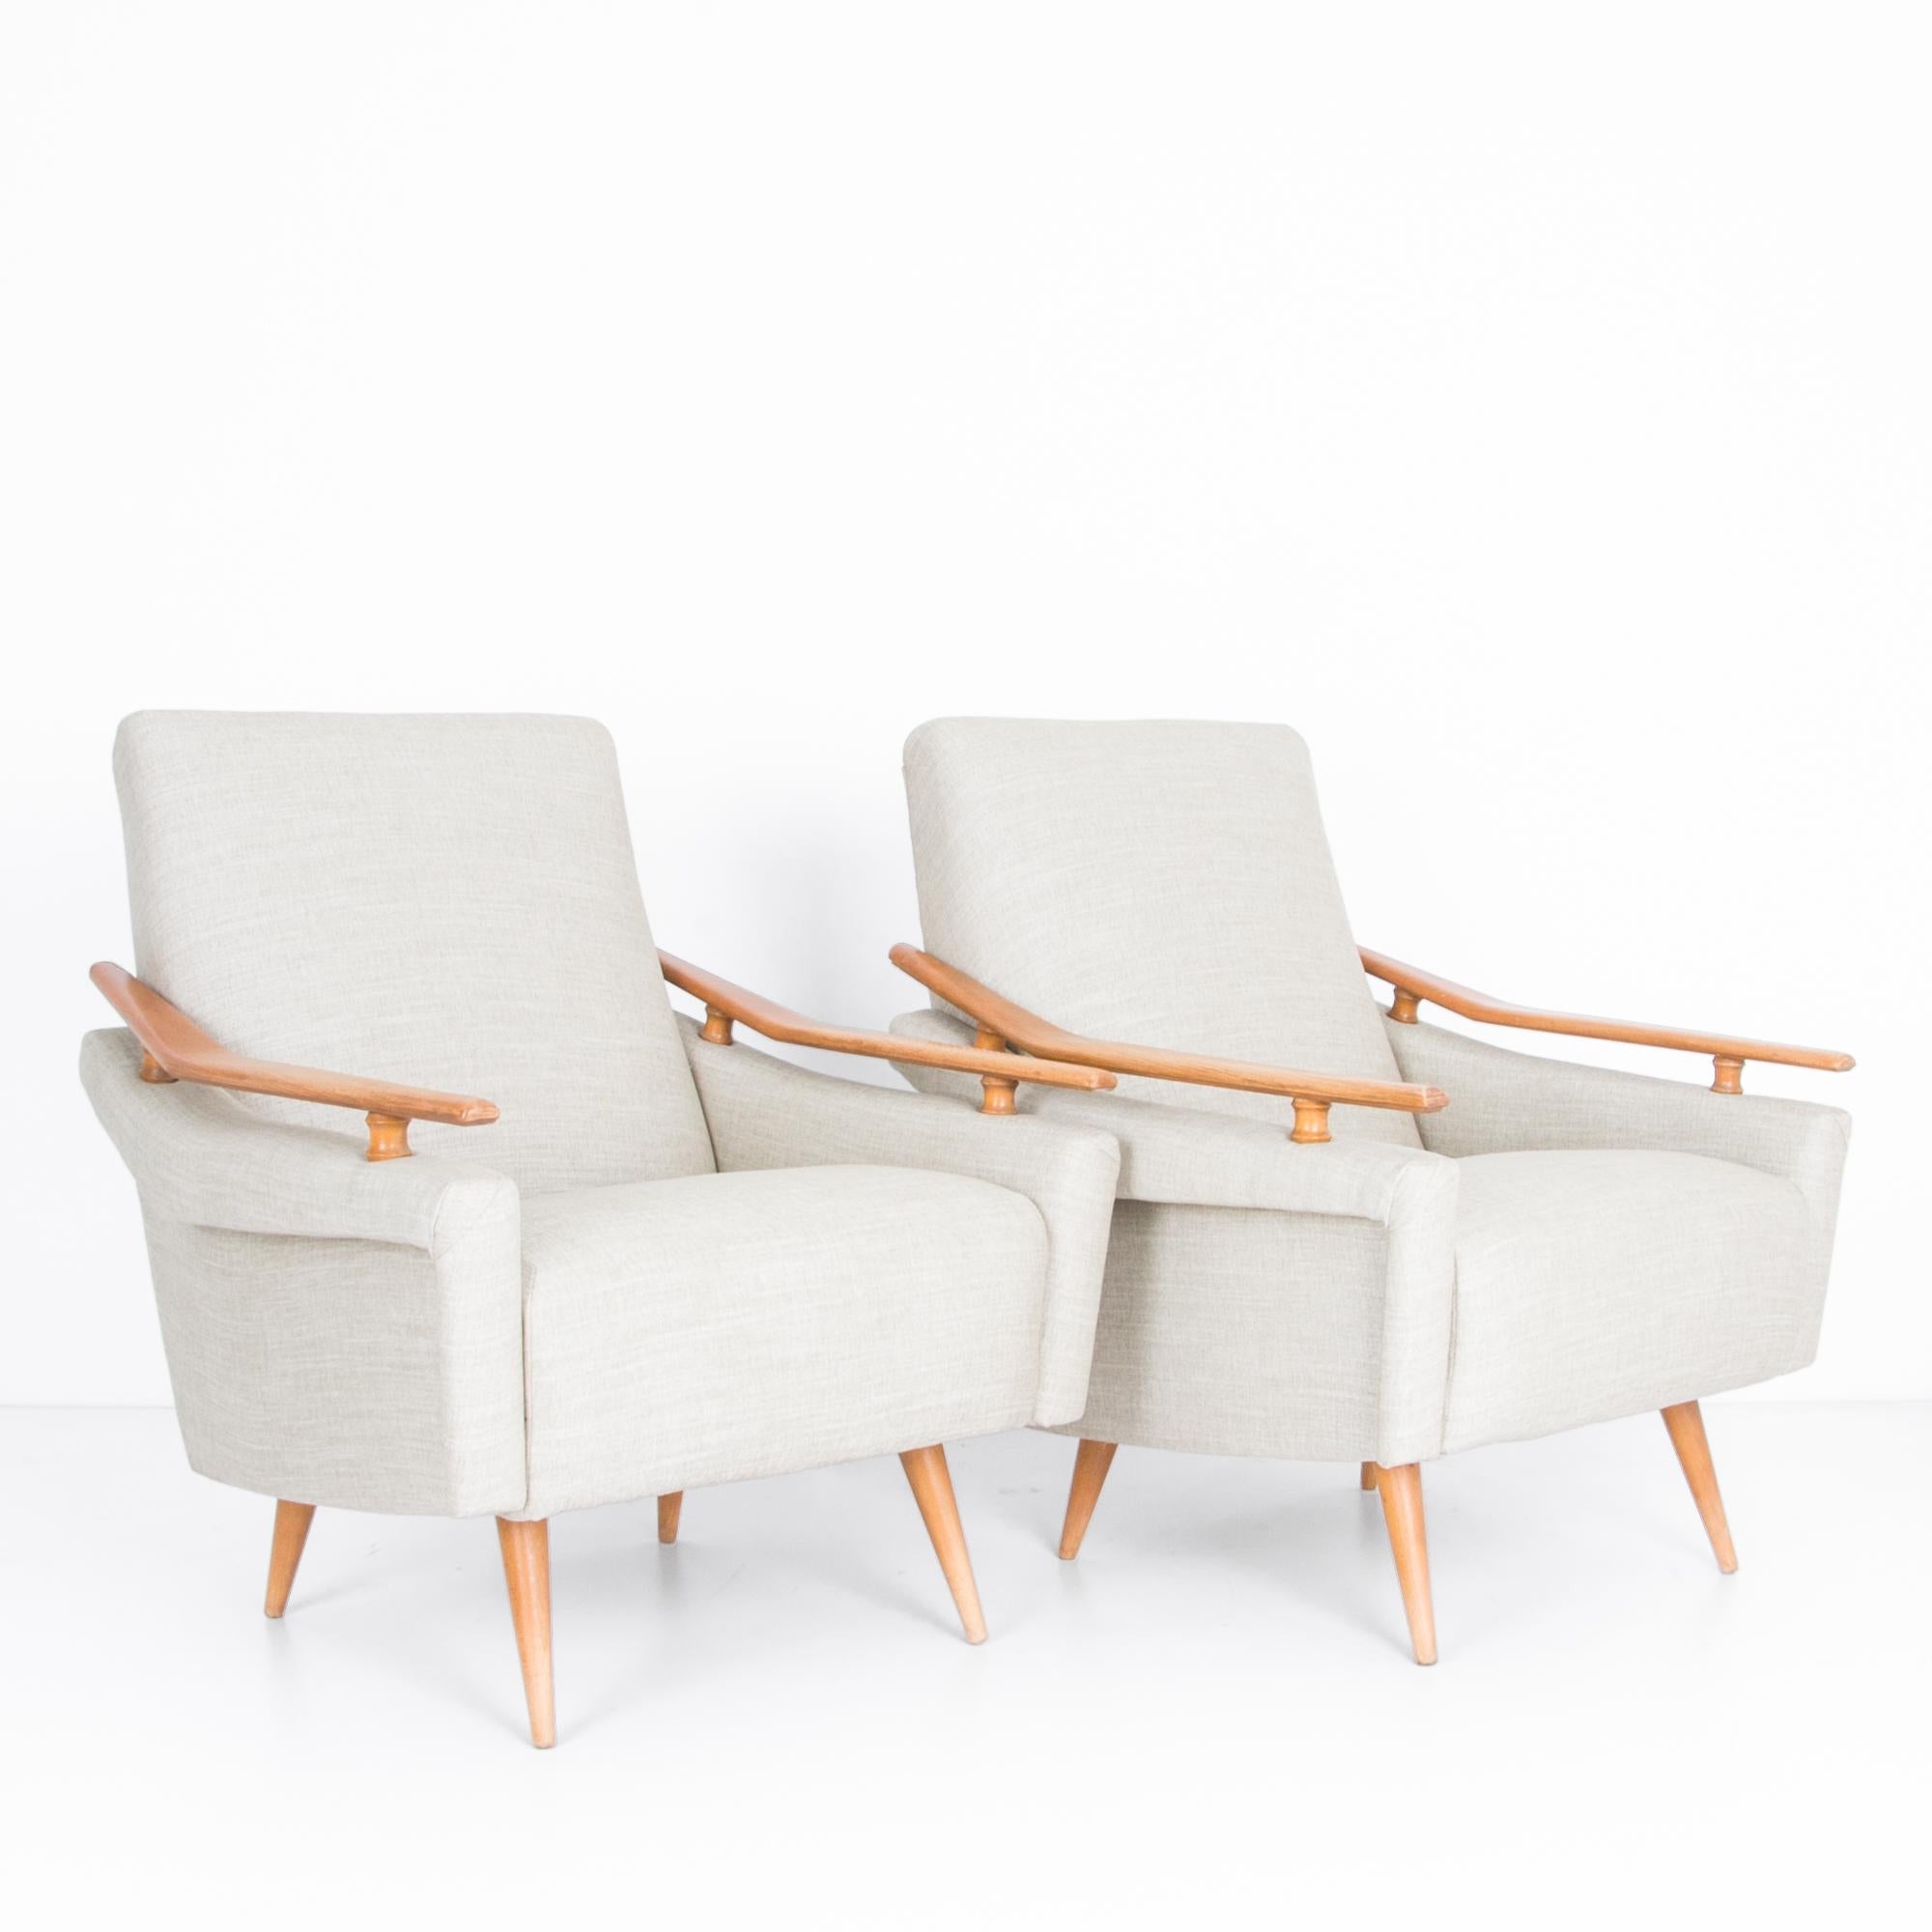 Wood 1960s French Mid-Century Modern Armchairs, a Pair